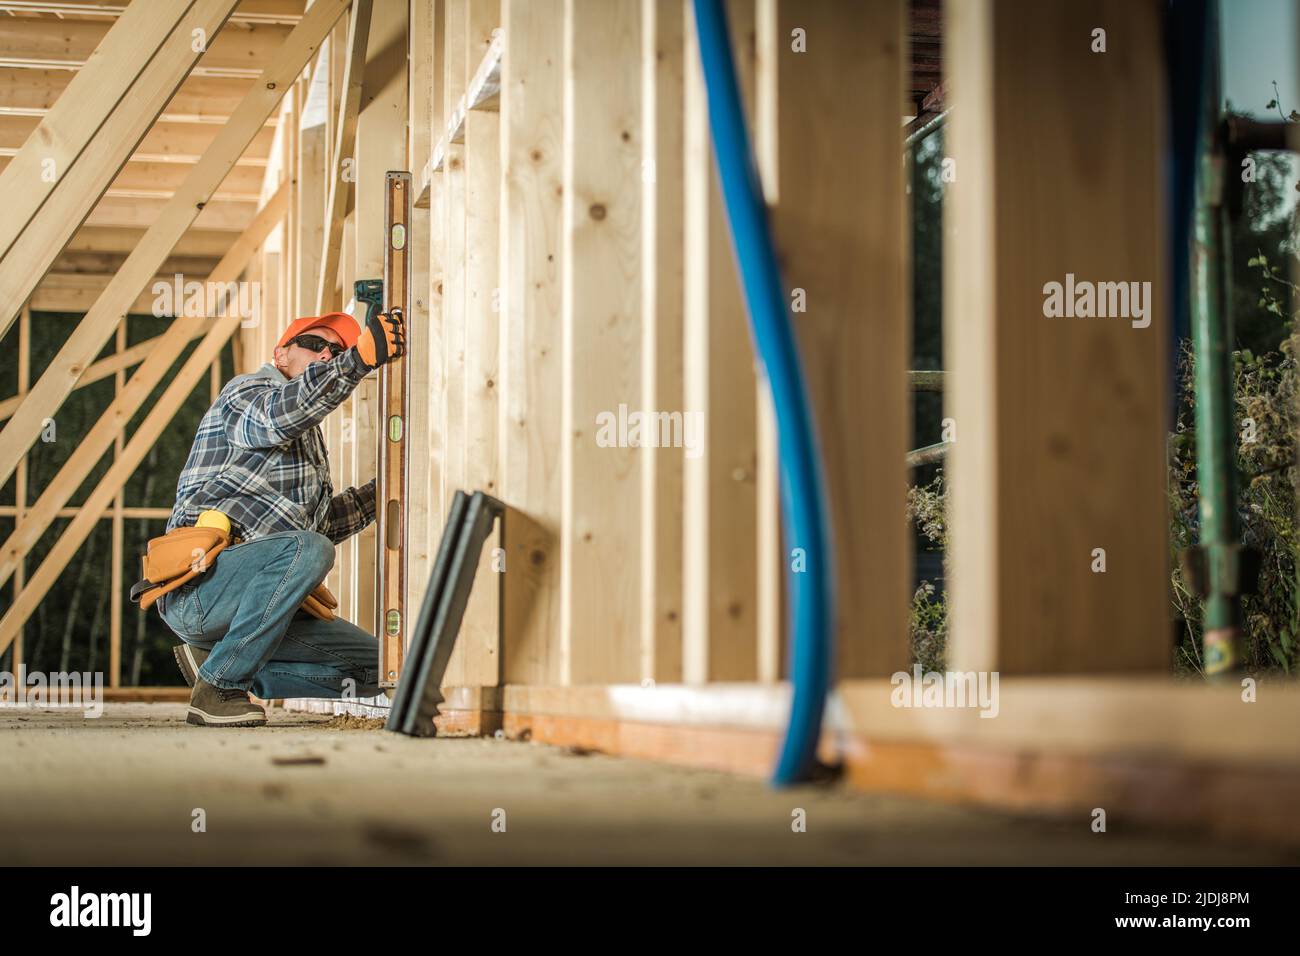 Process of Building New Wooden Residential Houses. Checking the Level of Building Carcass Walls with a Spirit Level Tool by Carpenter. Construction In Stock Photo